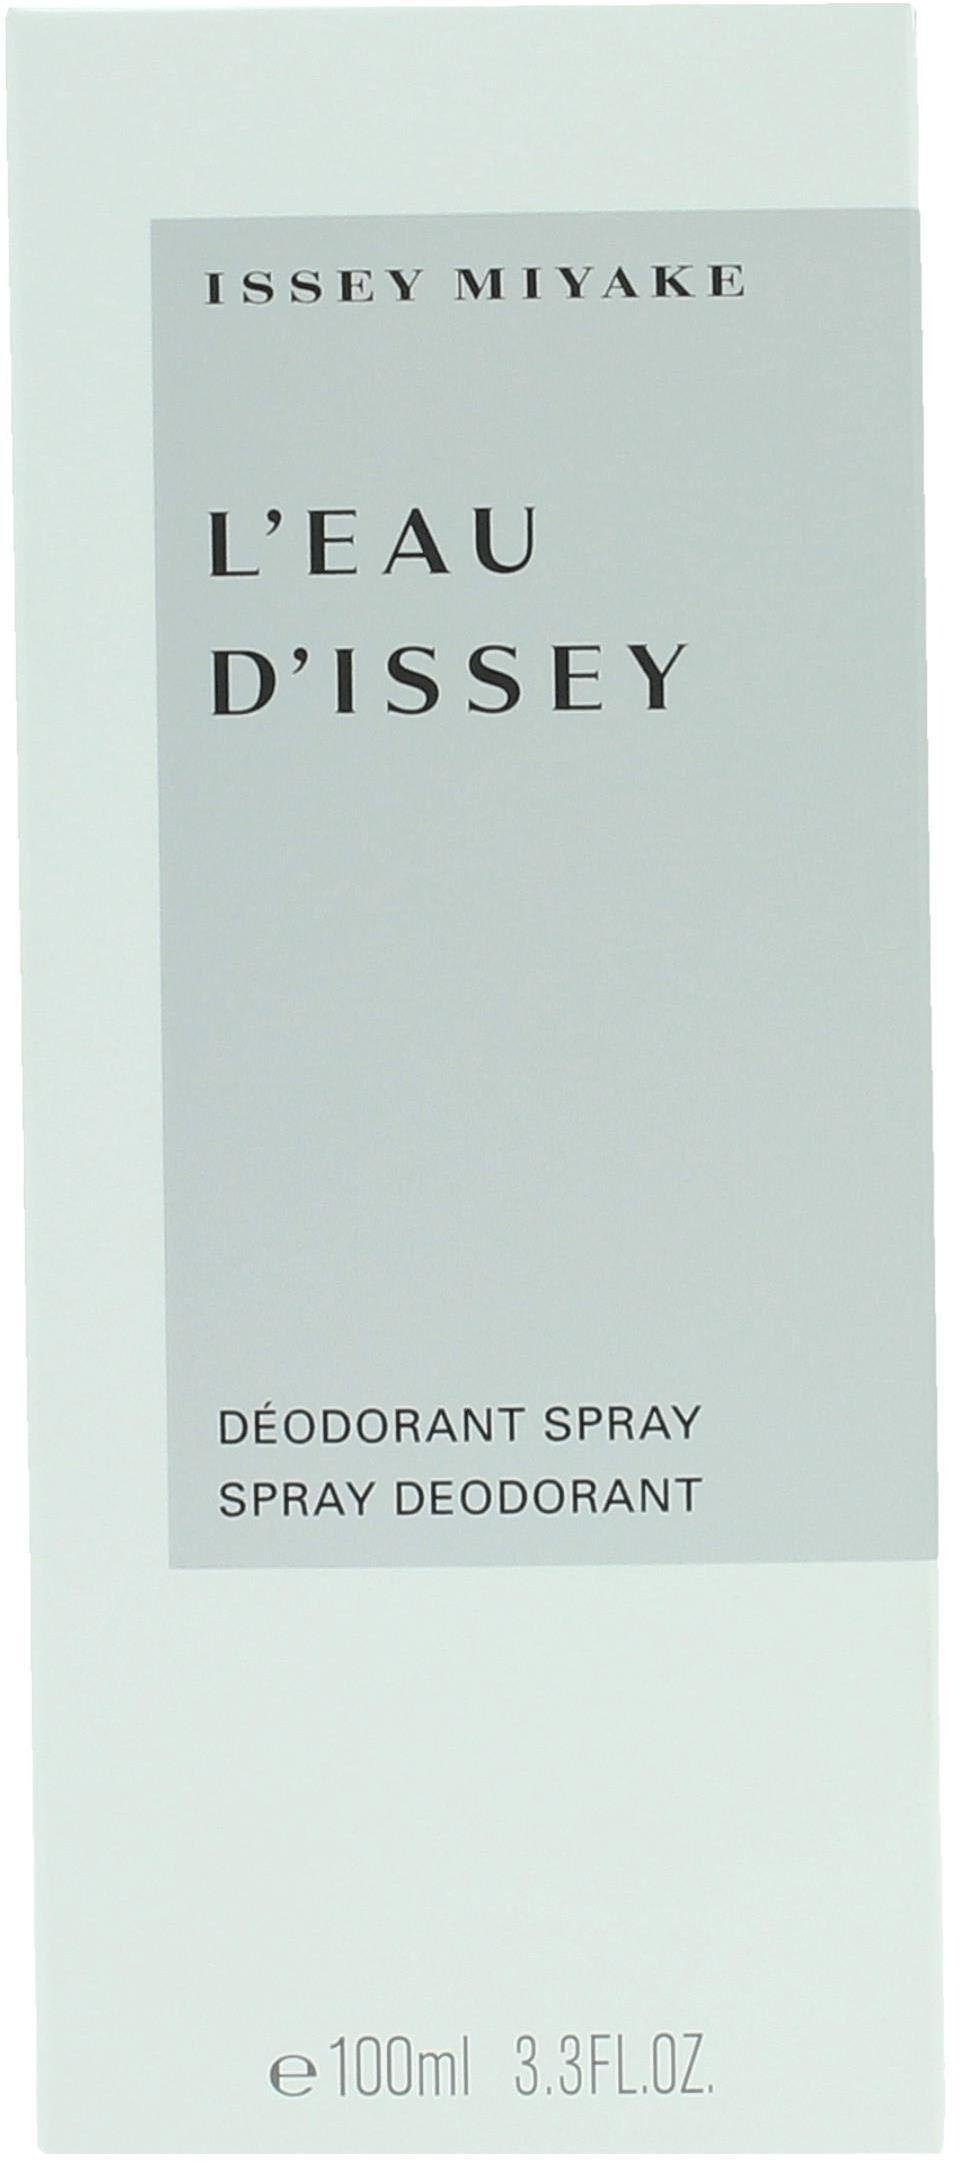 Pour Issey L'Eau Femme Miyake D'Issey Deo-Spray